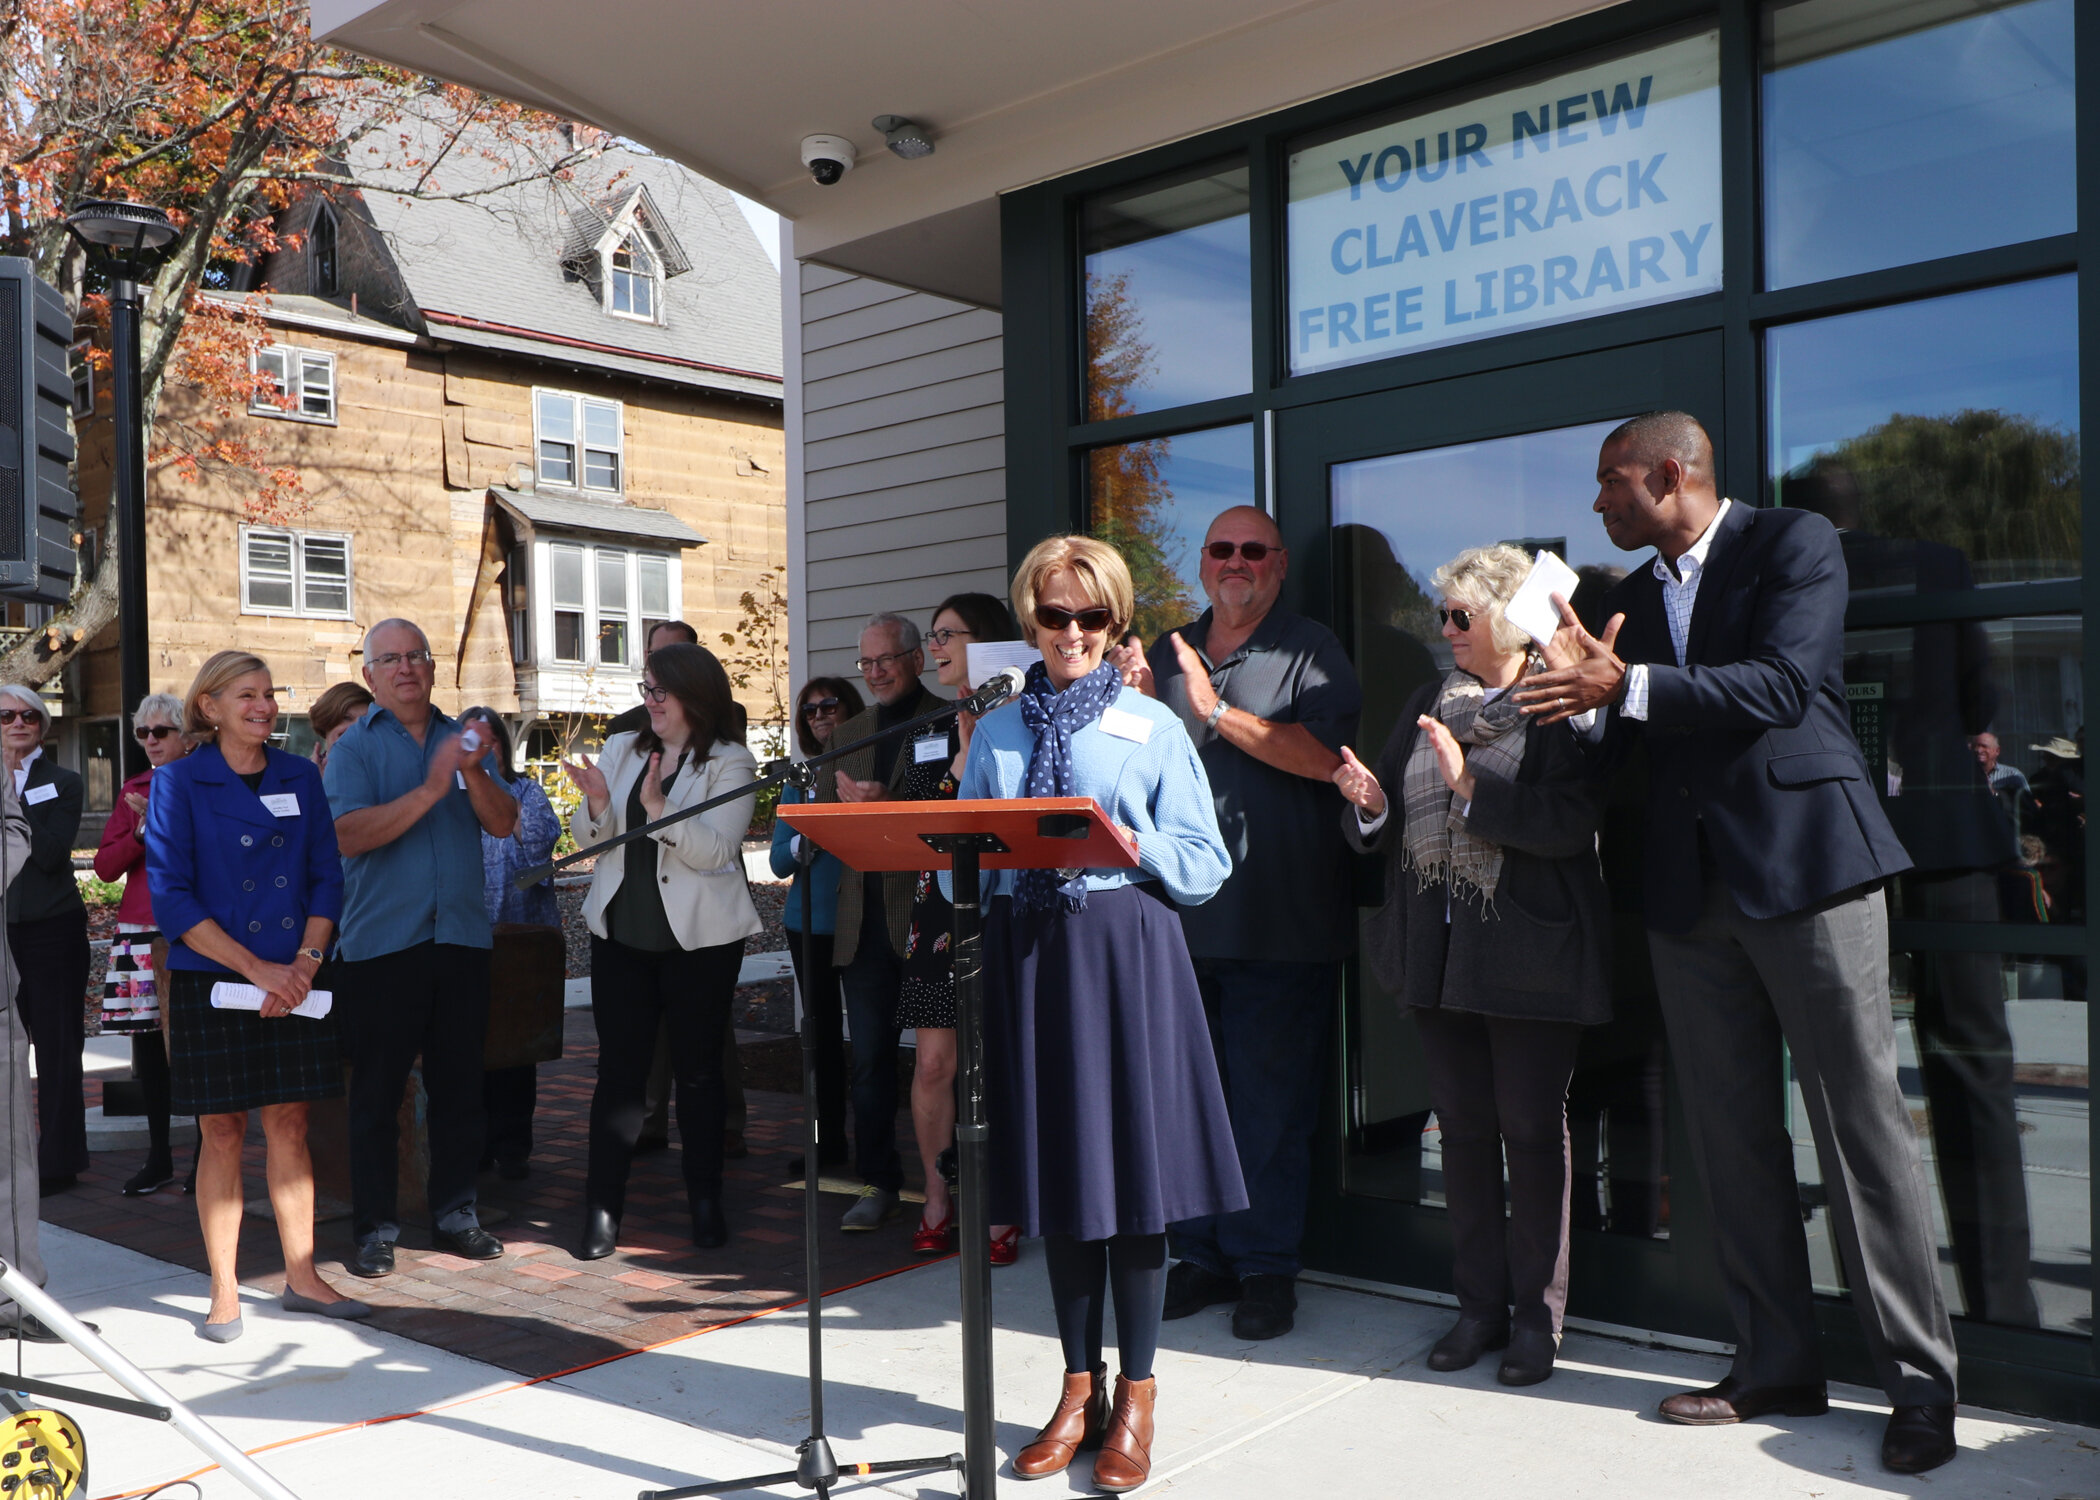 Claverack Free Library Grand Opening 57.JPG